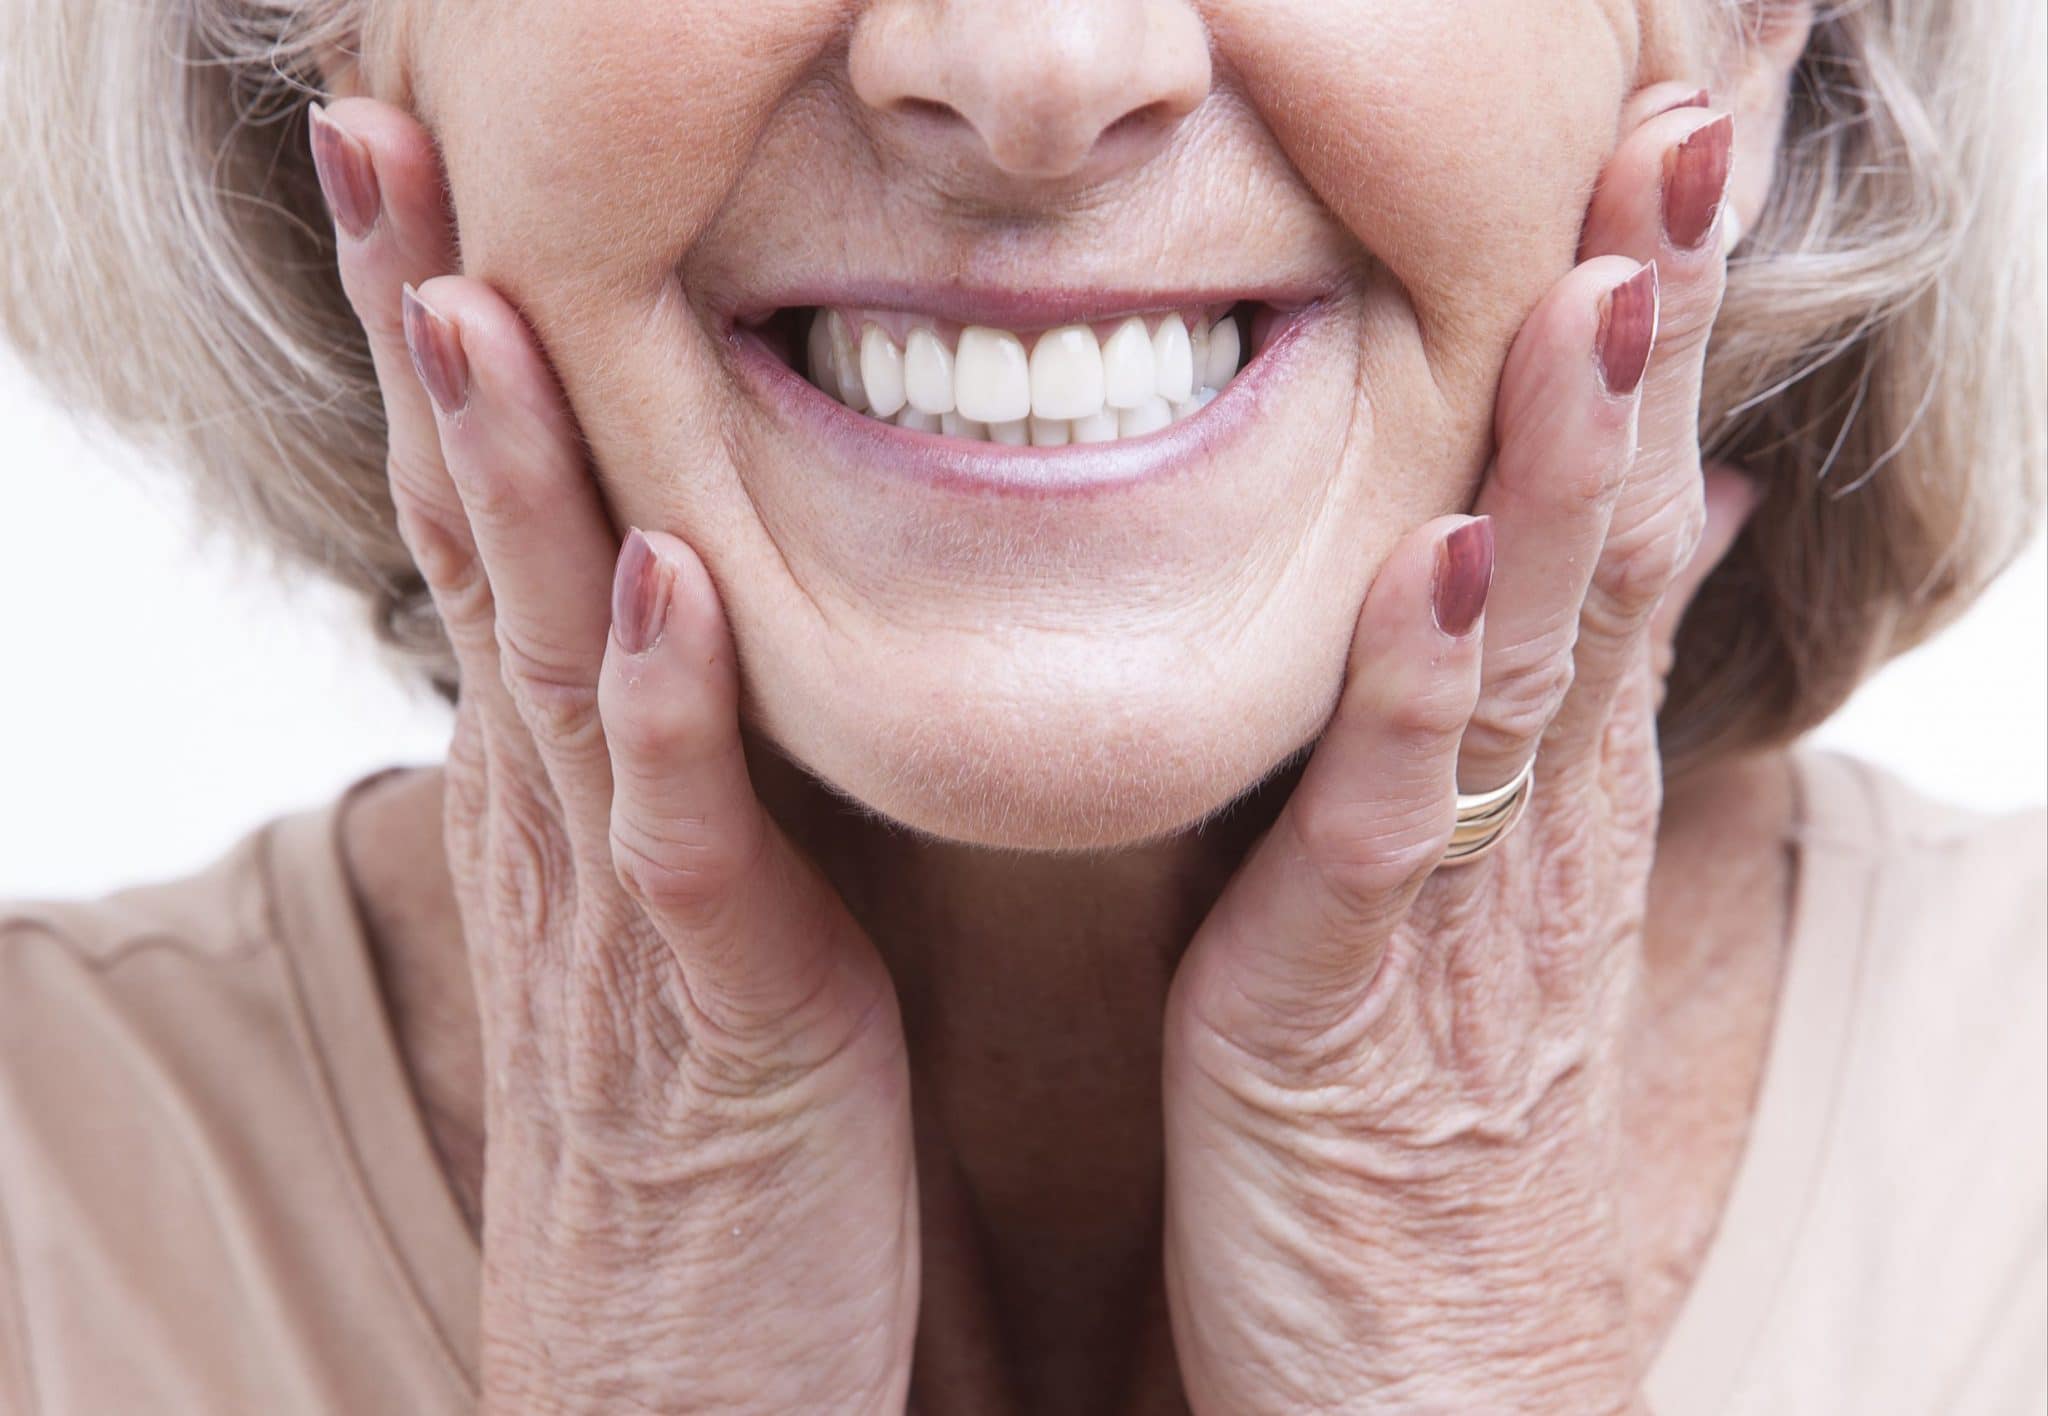 Elderly woman holding her face and showing off dentures